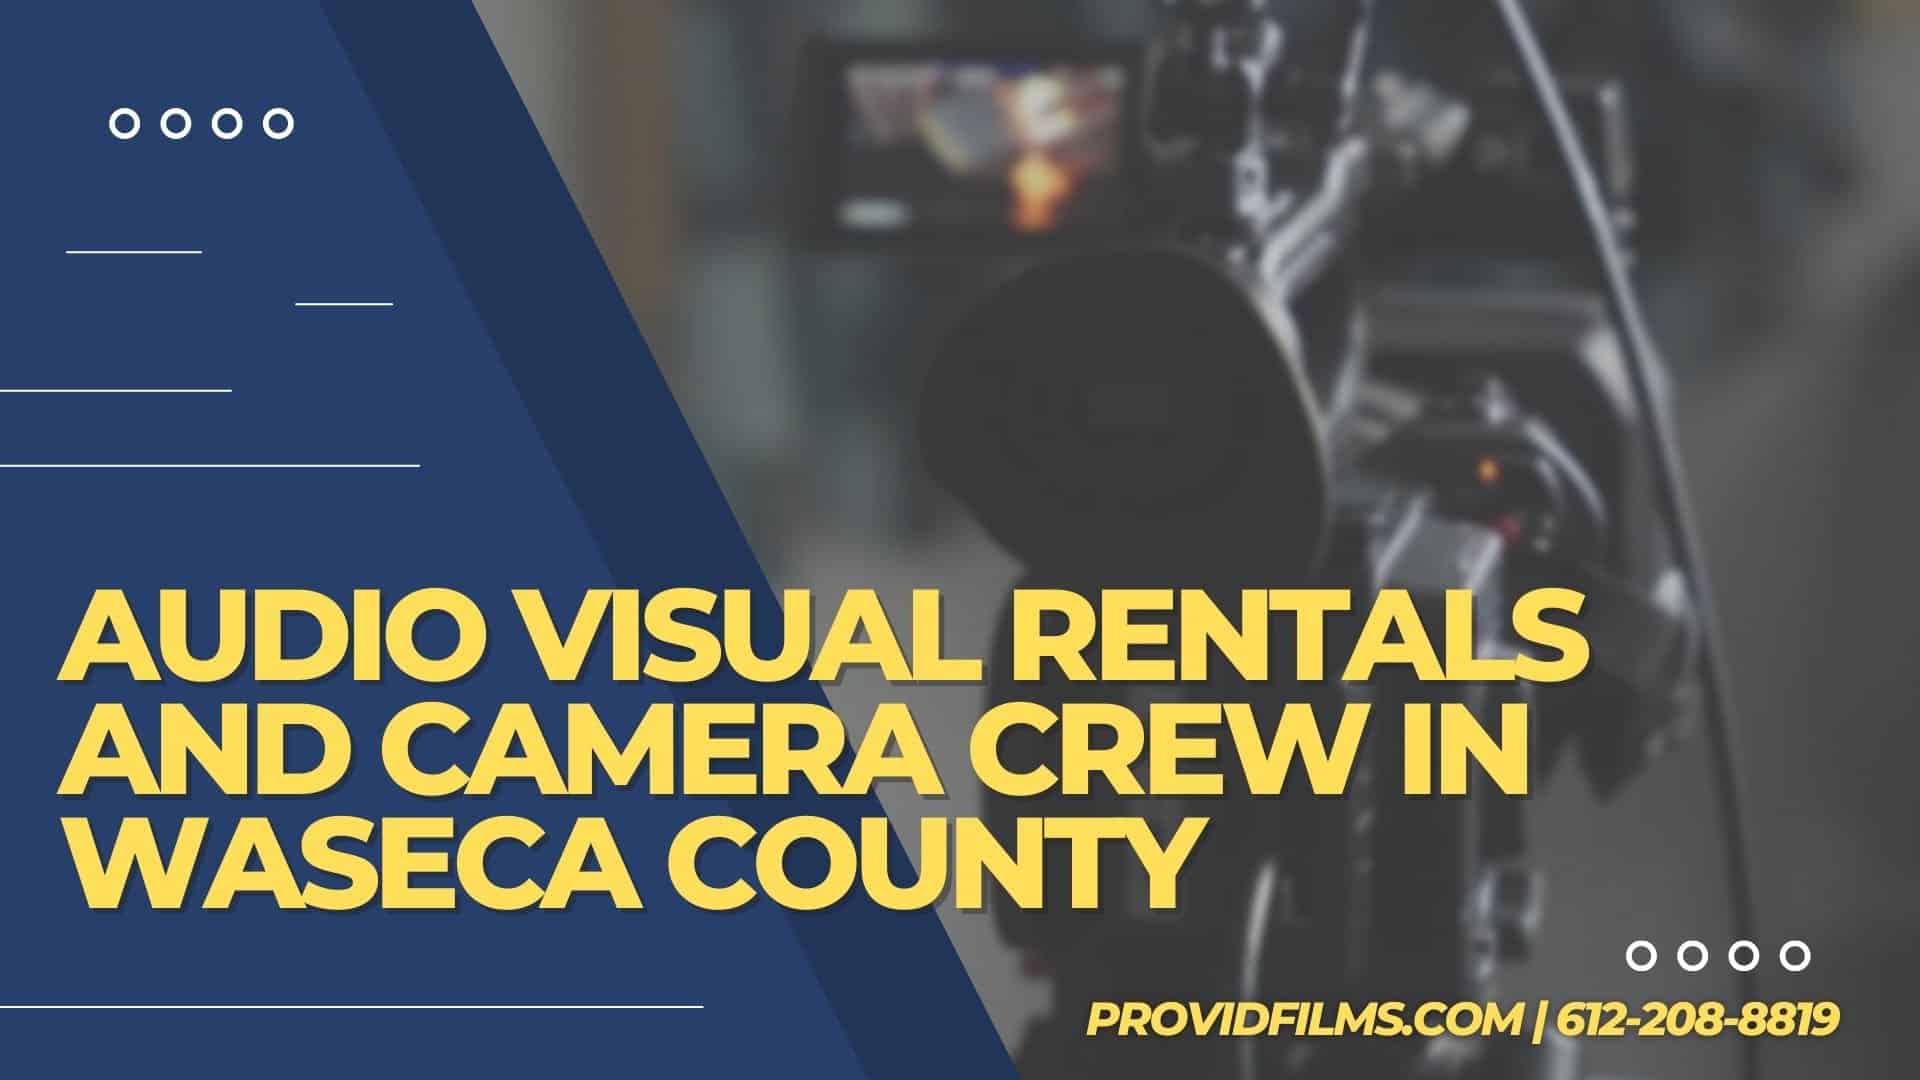 Graphic with a video camera crew with the text saying "AV Rental and Camera Crew in Waseca County"